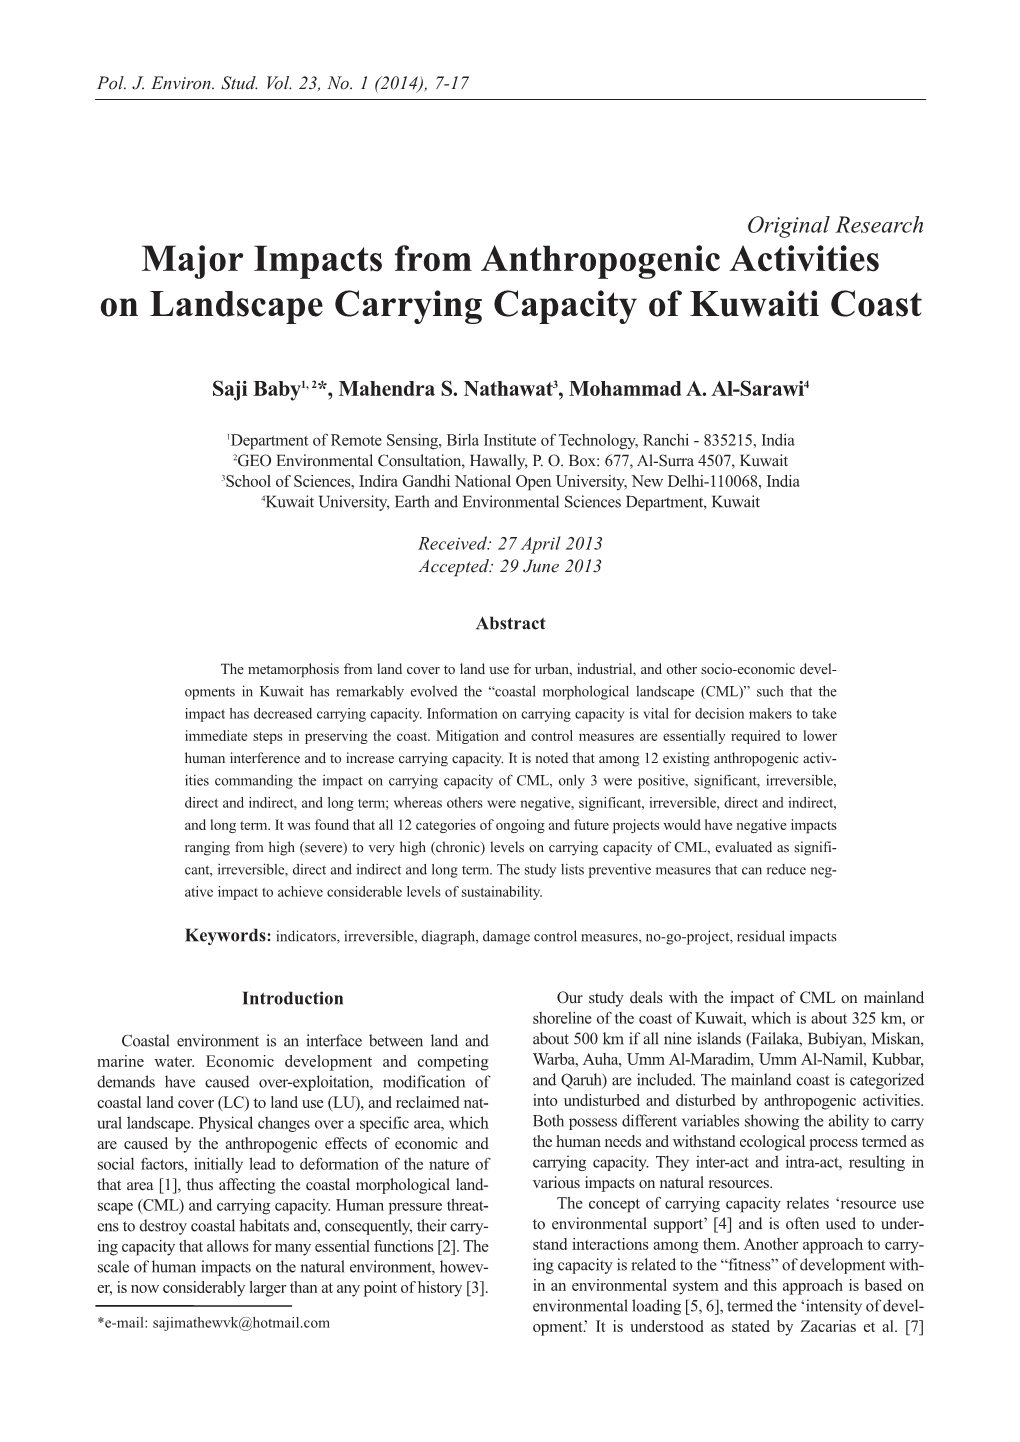 Major Impacts from Anthropogenic Activities on Landscape Carrying Capacity of Kuwaiti Coast